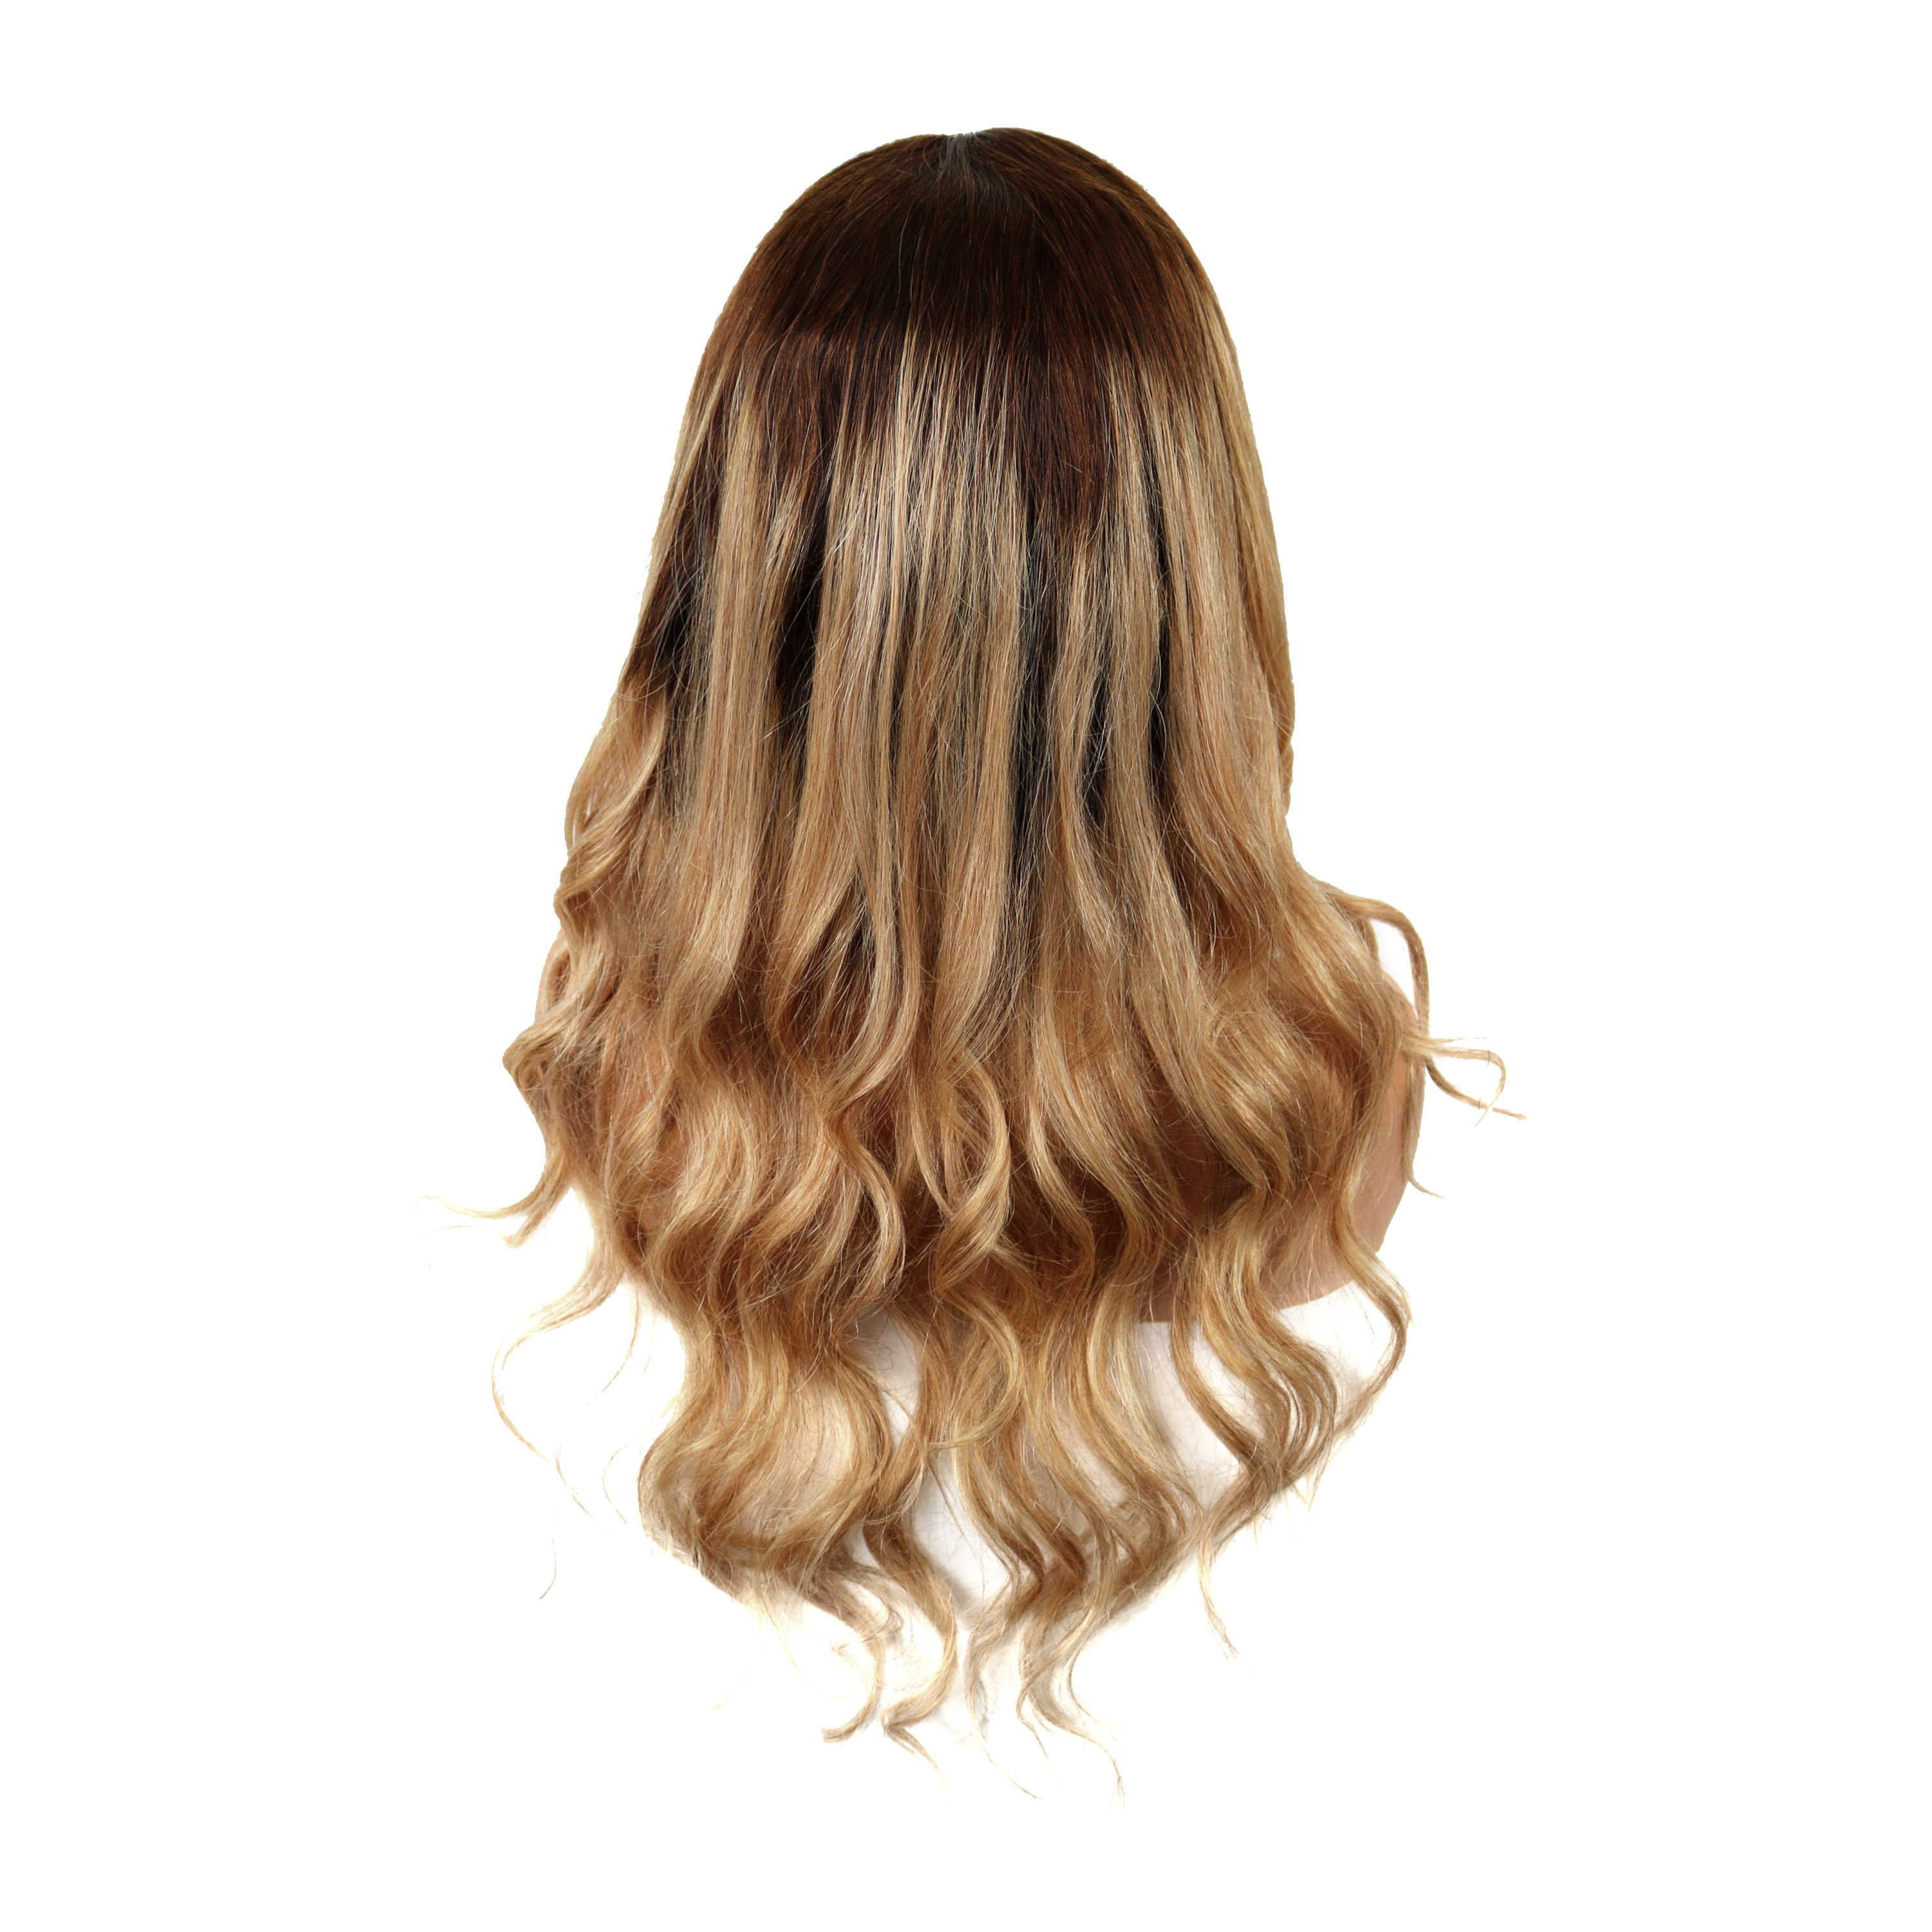 Lace Front Cap Human Hair Wavy 120% 22 Inches Wigs